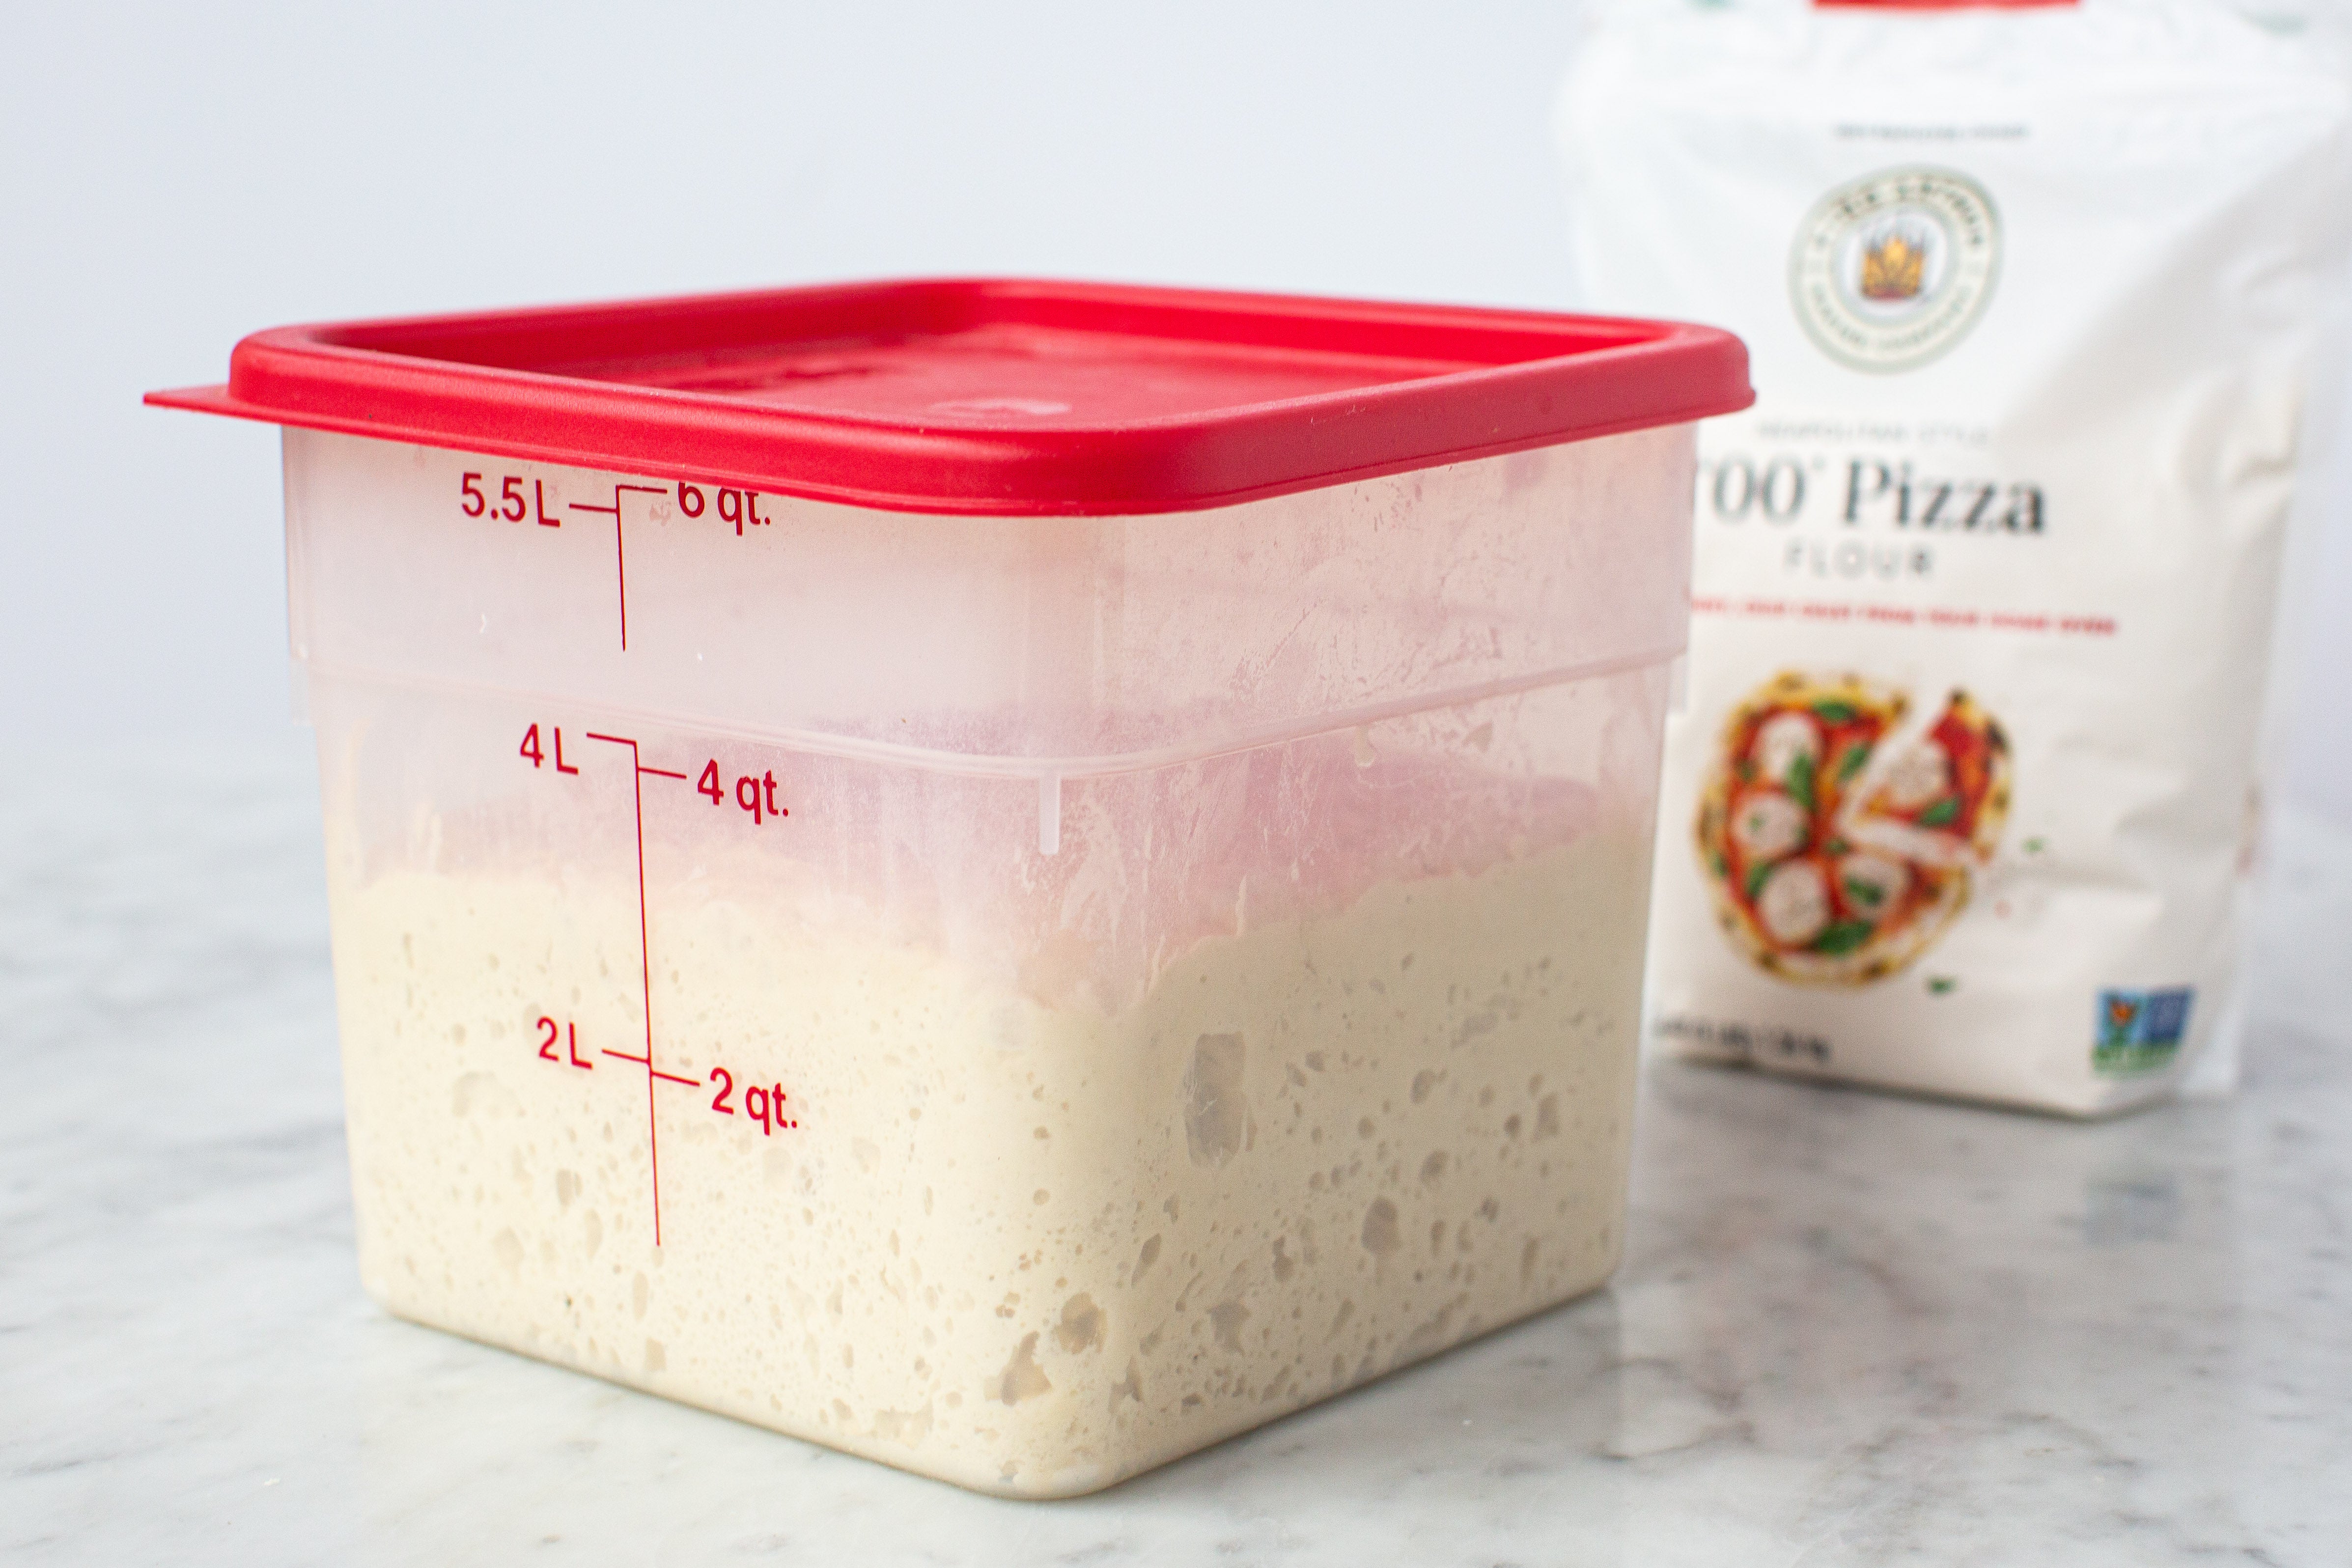 5 Tips For Making Clear Storage Containers Work For Your Pantry